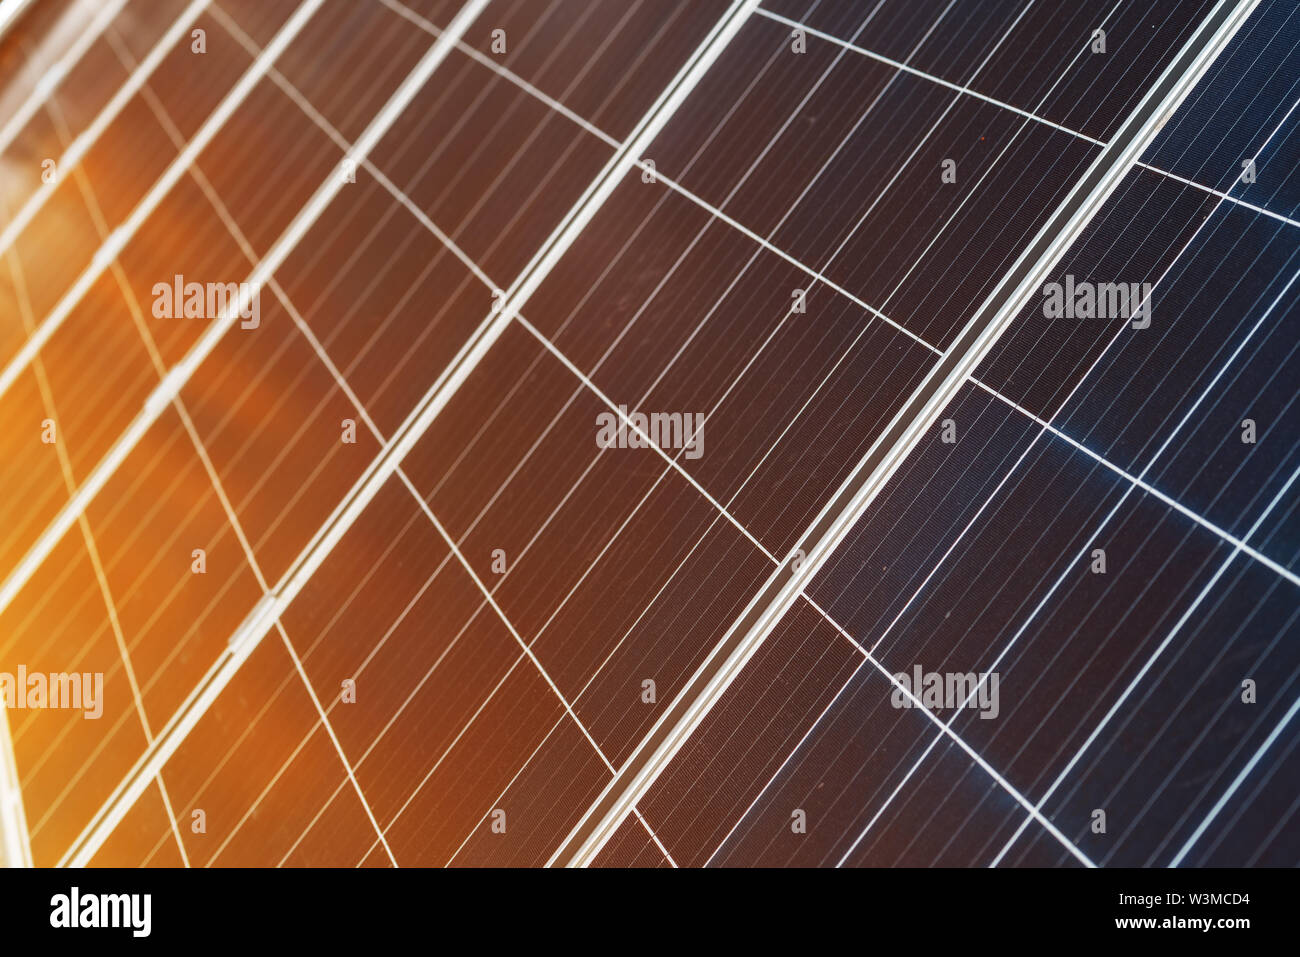 Photovoltaic solar panels as renewable energy source collector Stock Photo